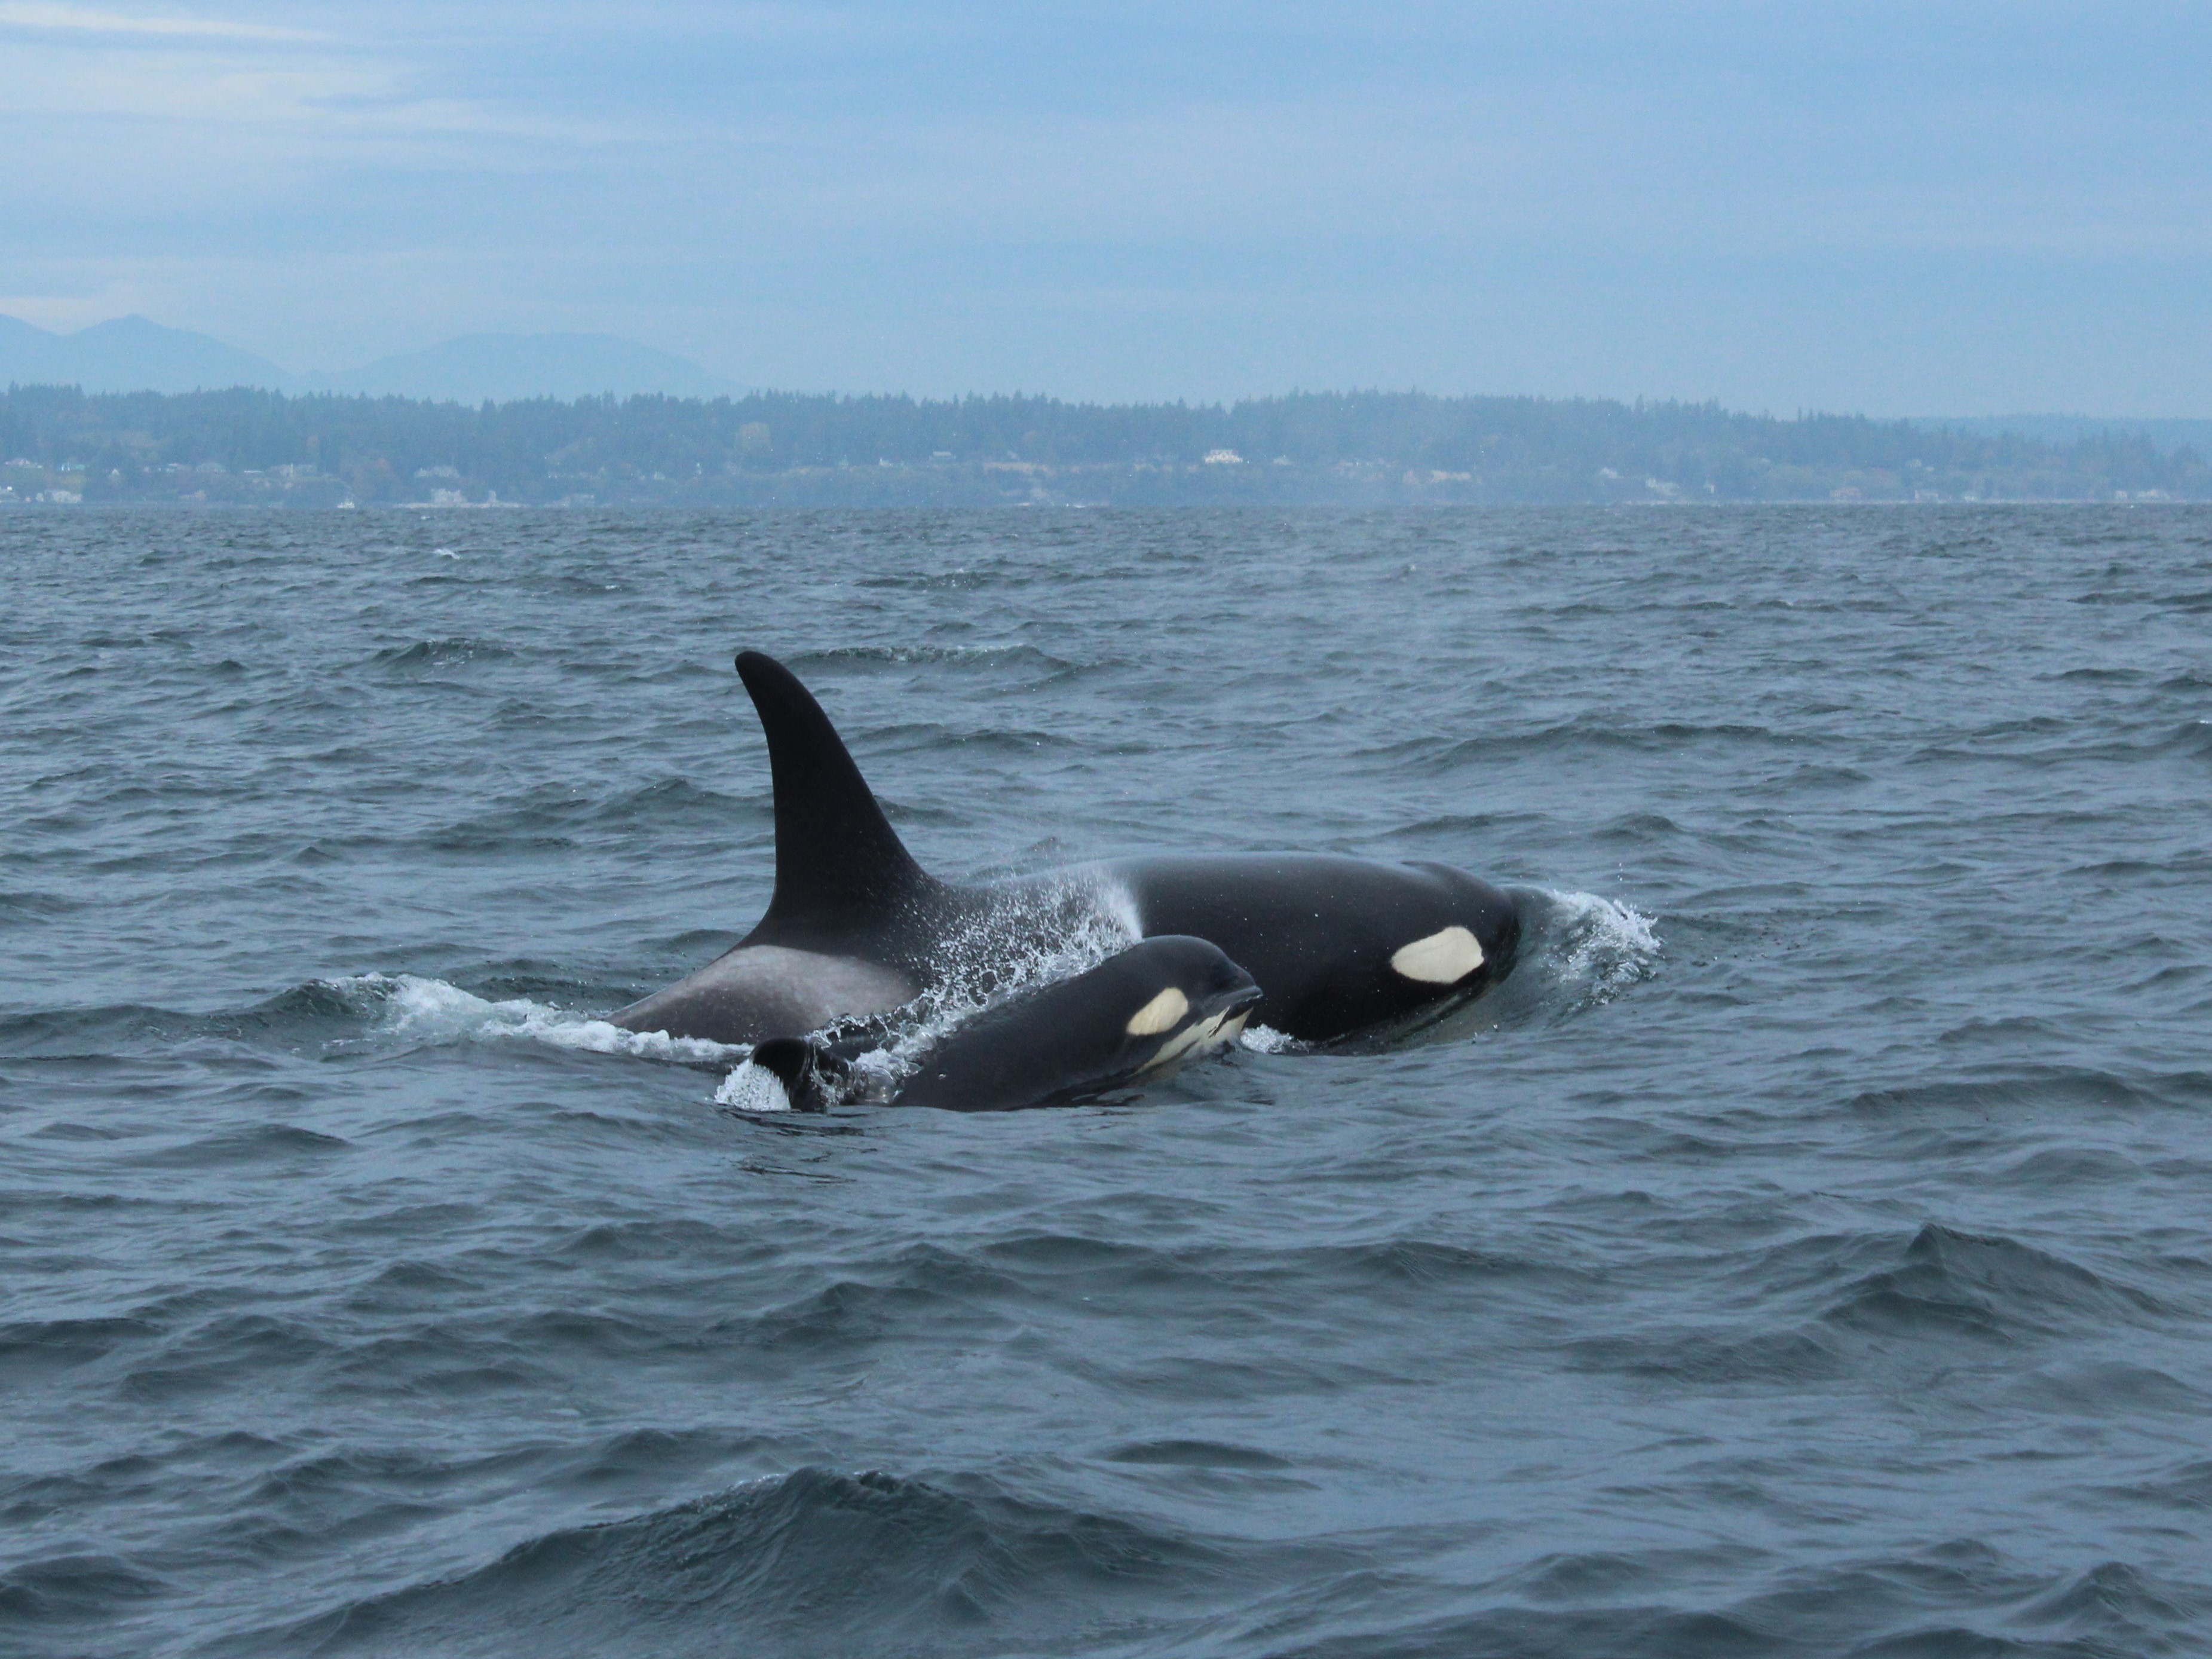 J56 (Tofino) with her mother J31 (Tsuchi), by Mark Sears, Permit 21348